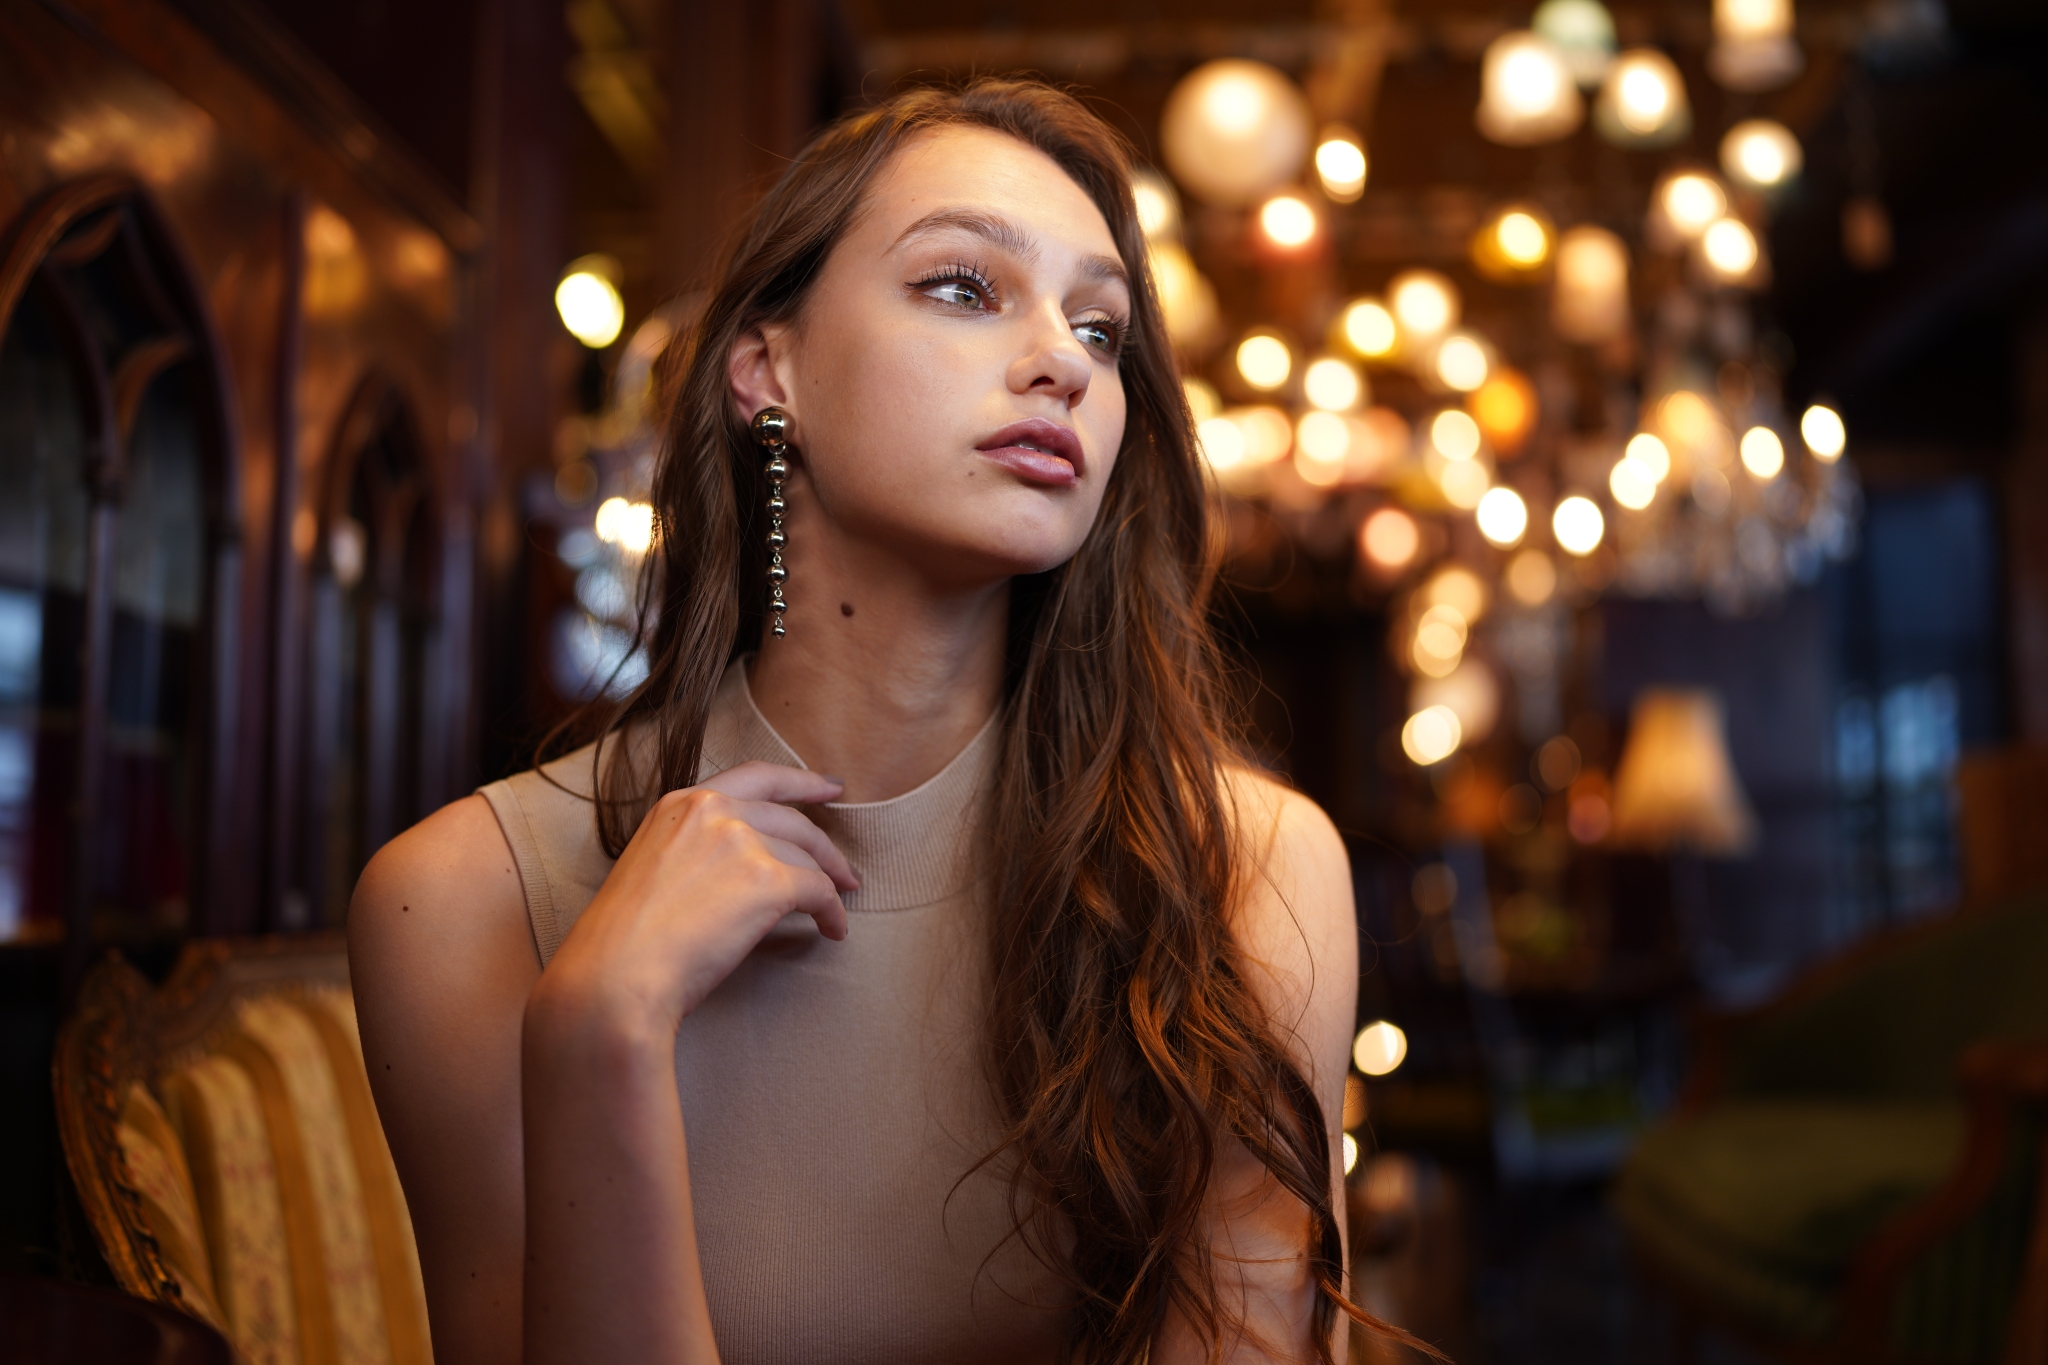 Portrait of female model looking to her left with interior lights in bokeh background